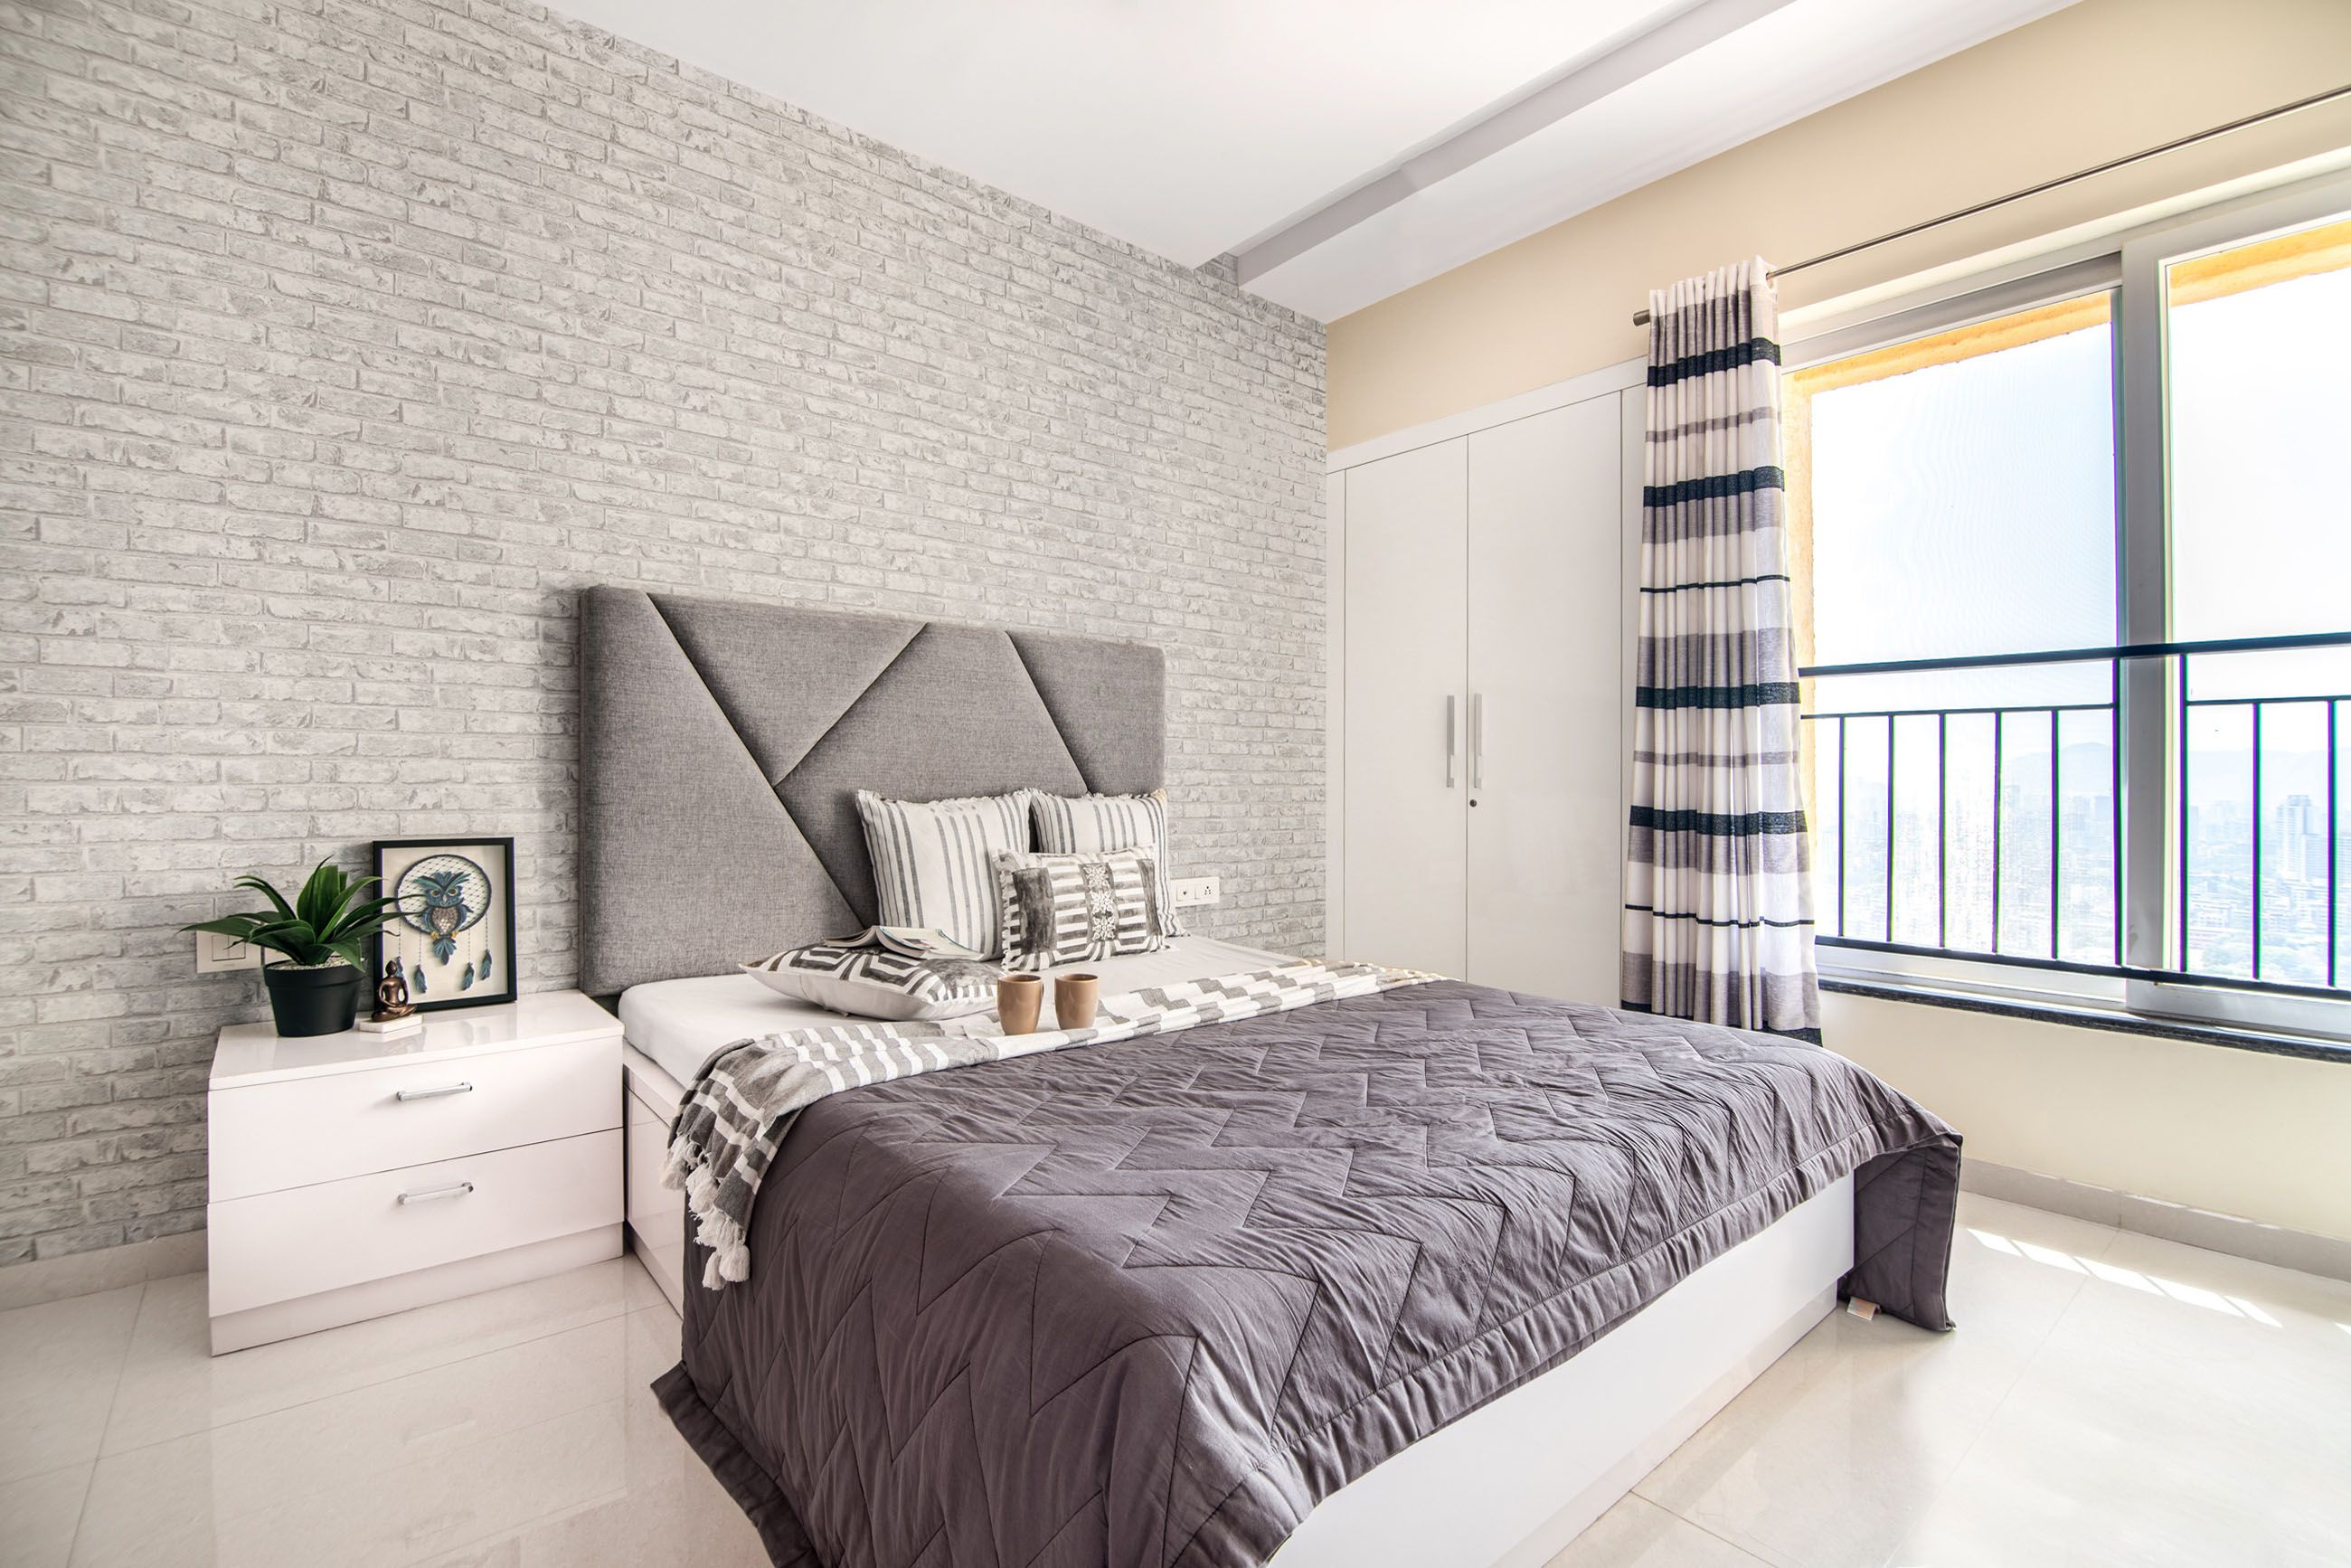 Modern Guest Room Design With Grey Stone Cladding